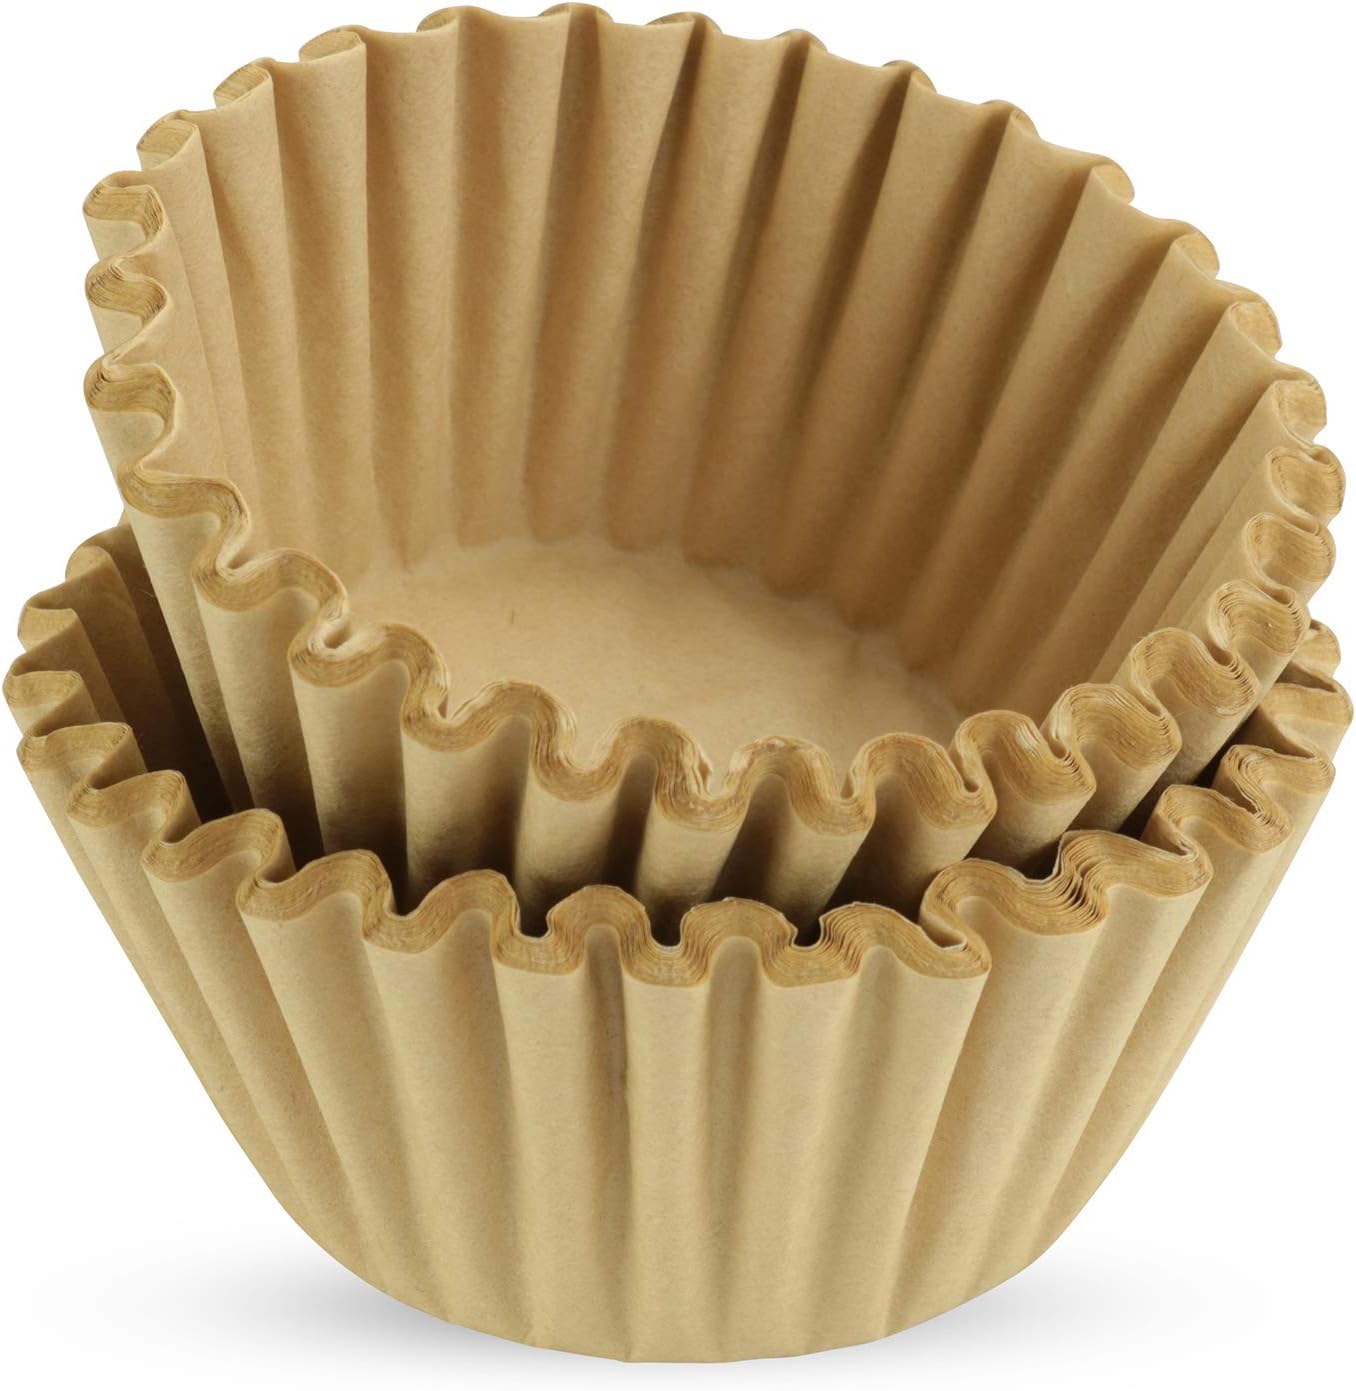 8-12 Cup Basket Coffee Filters (Natural Unbleached, 200)